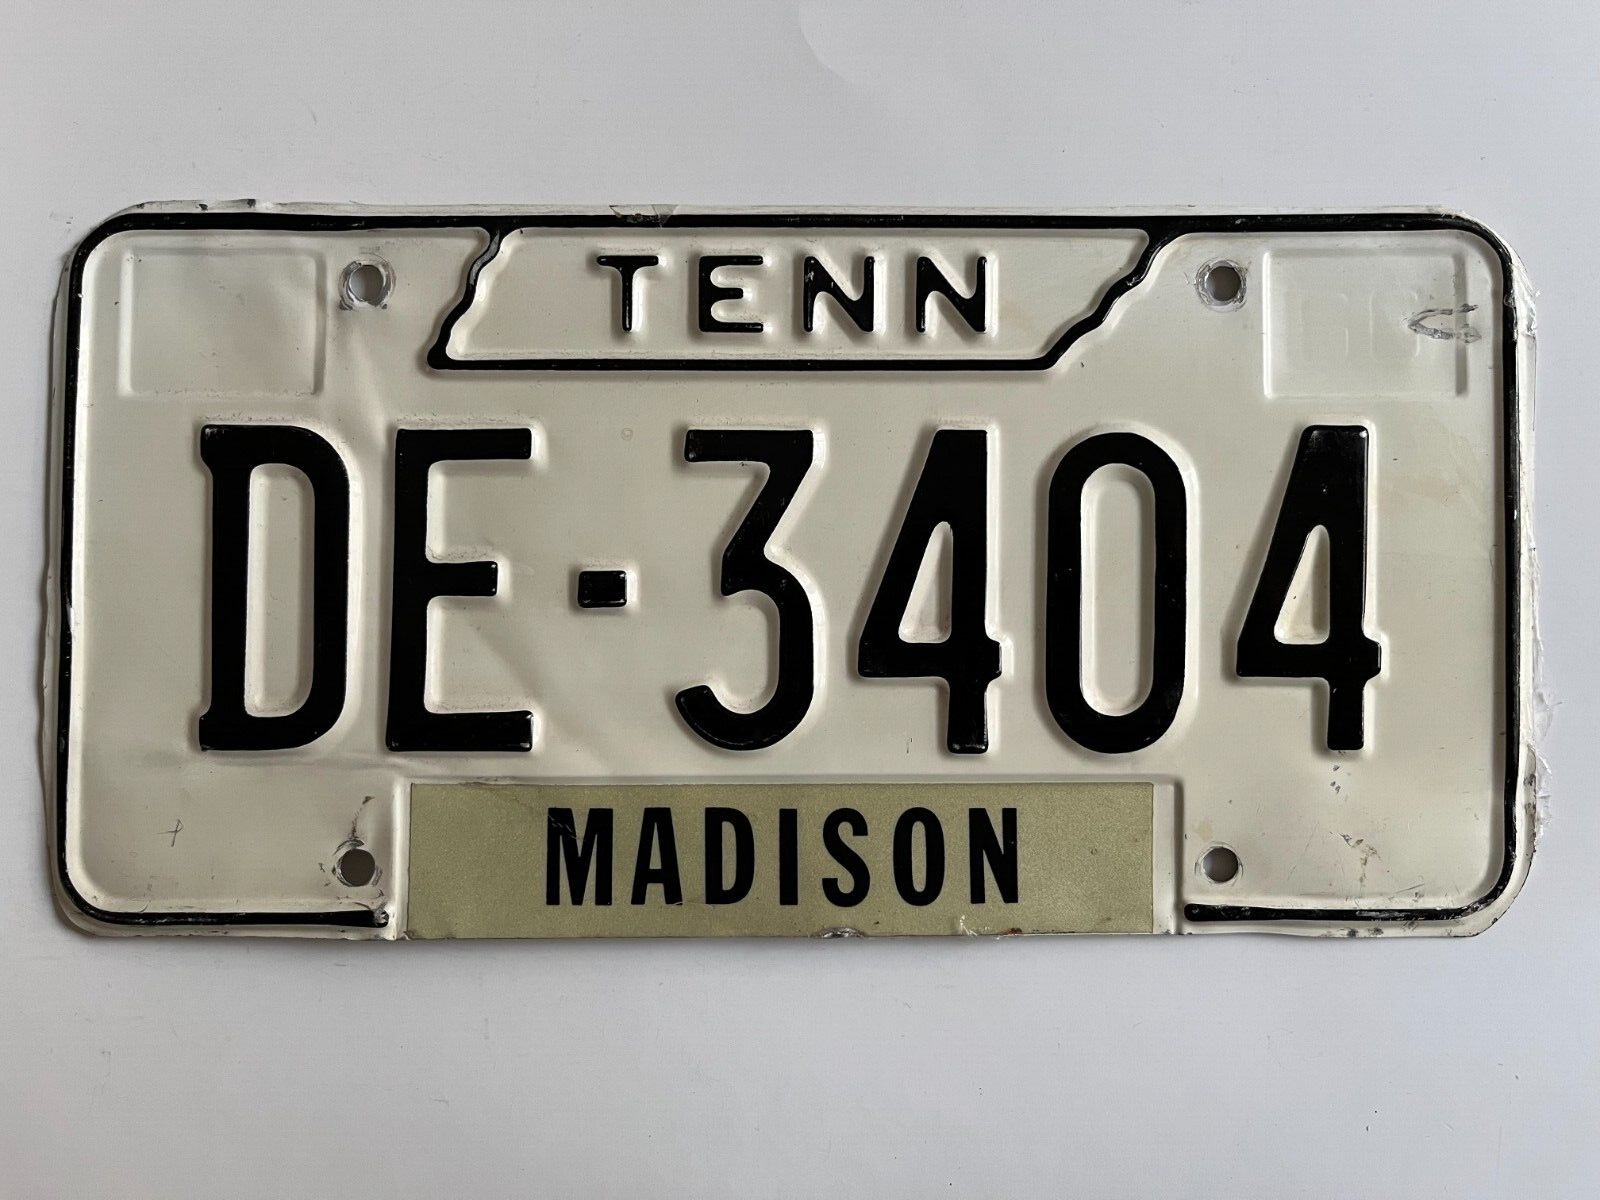 1966 Tennessee License Plate Madison County All Original